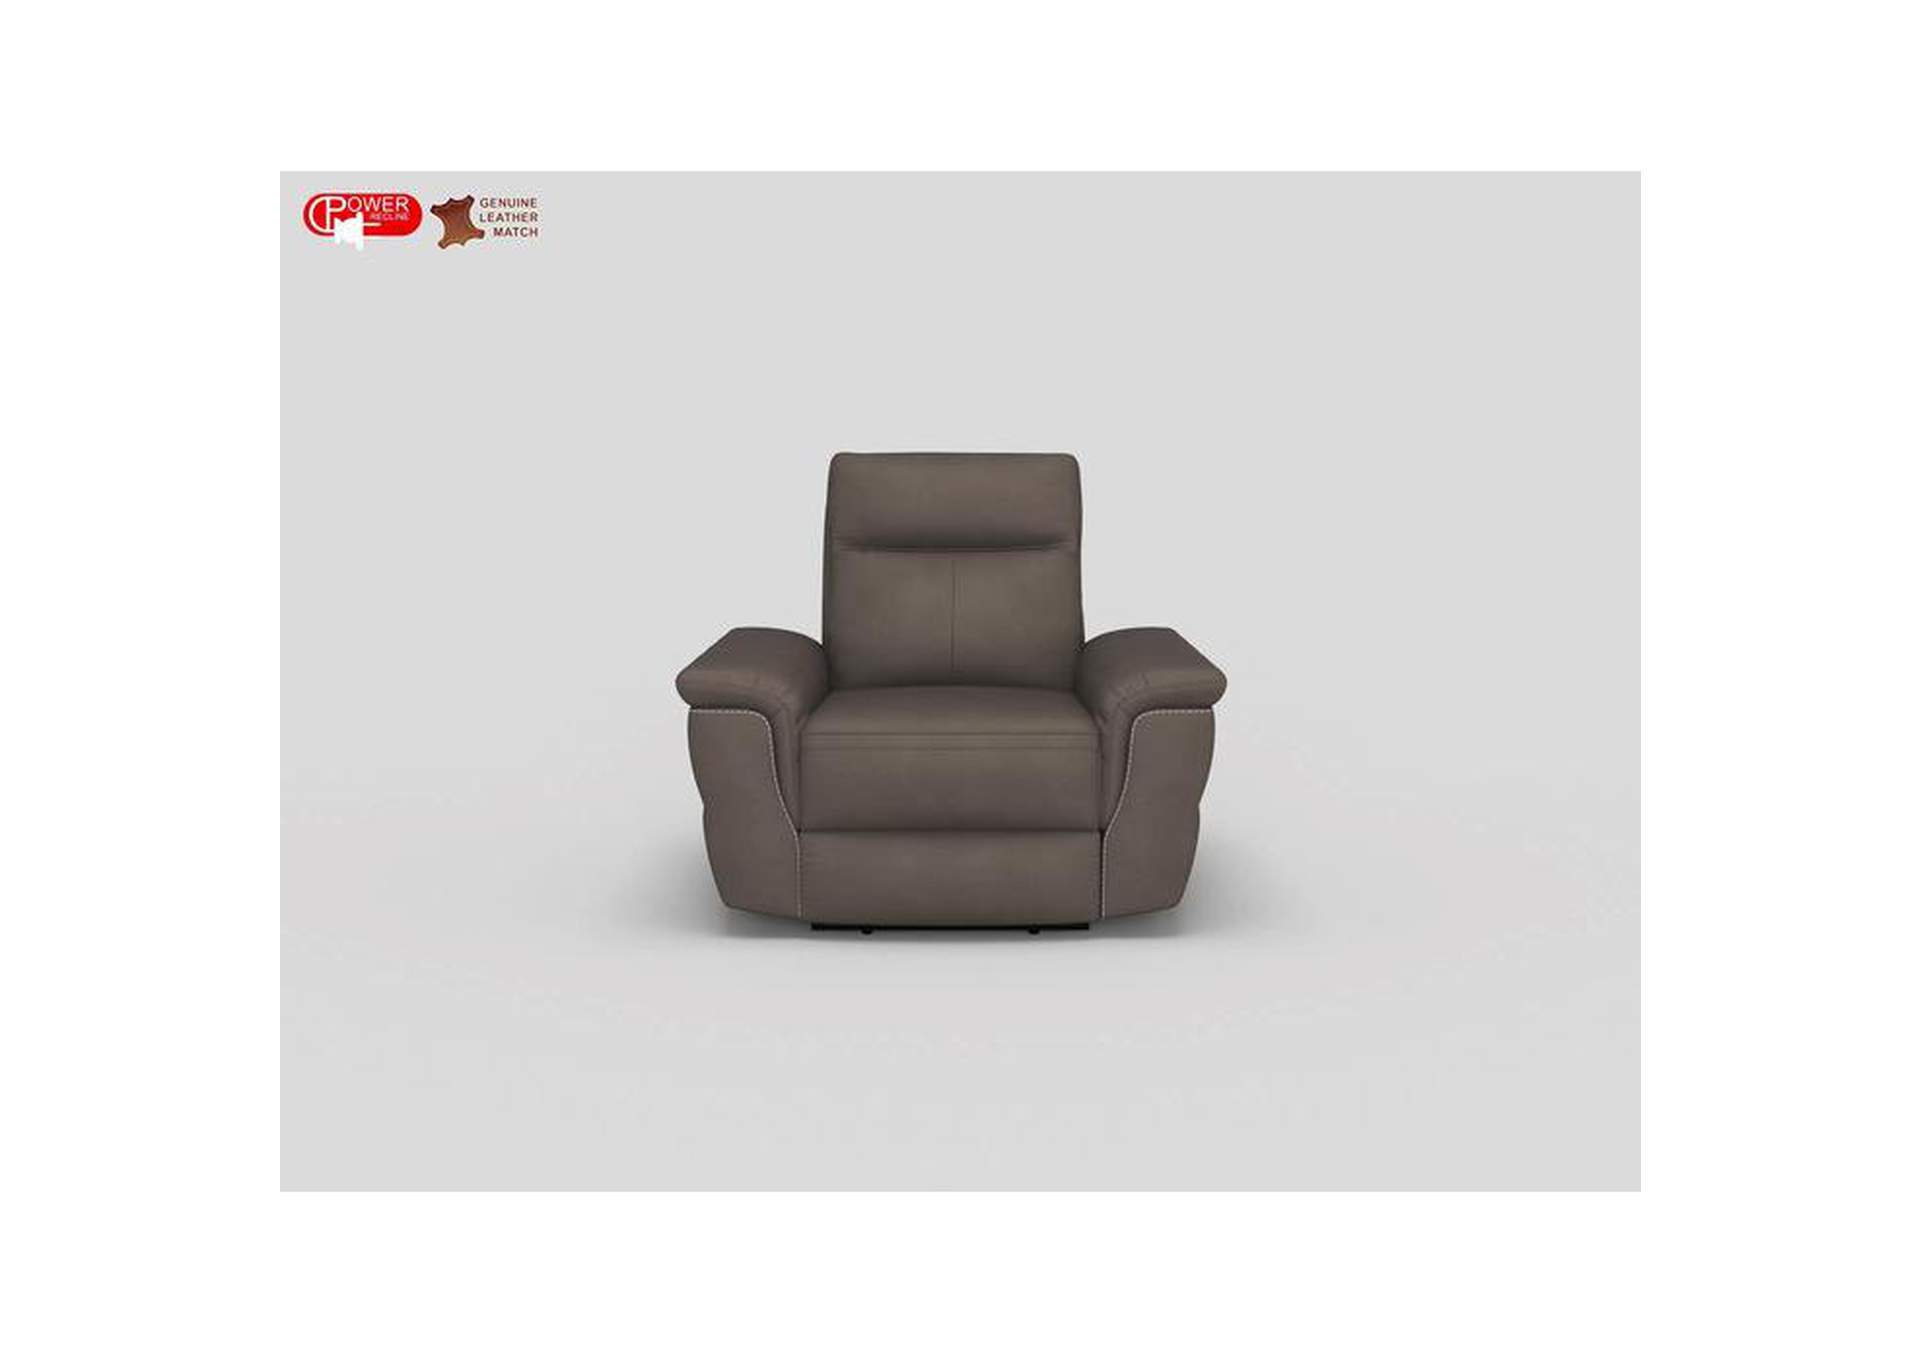 Olympia Power Reclining Chair With Usb Port,Homelegance